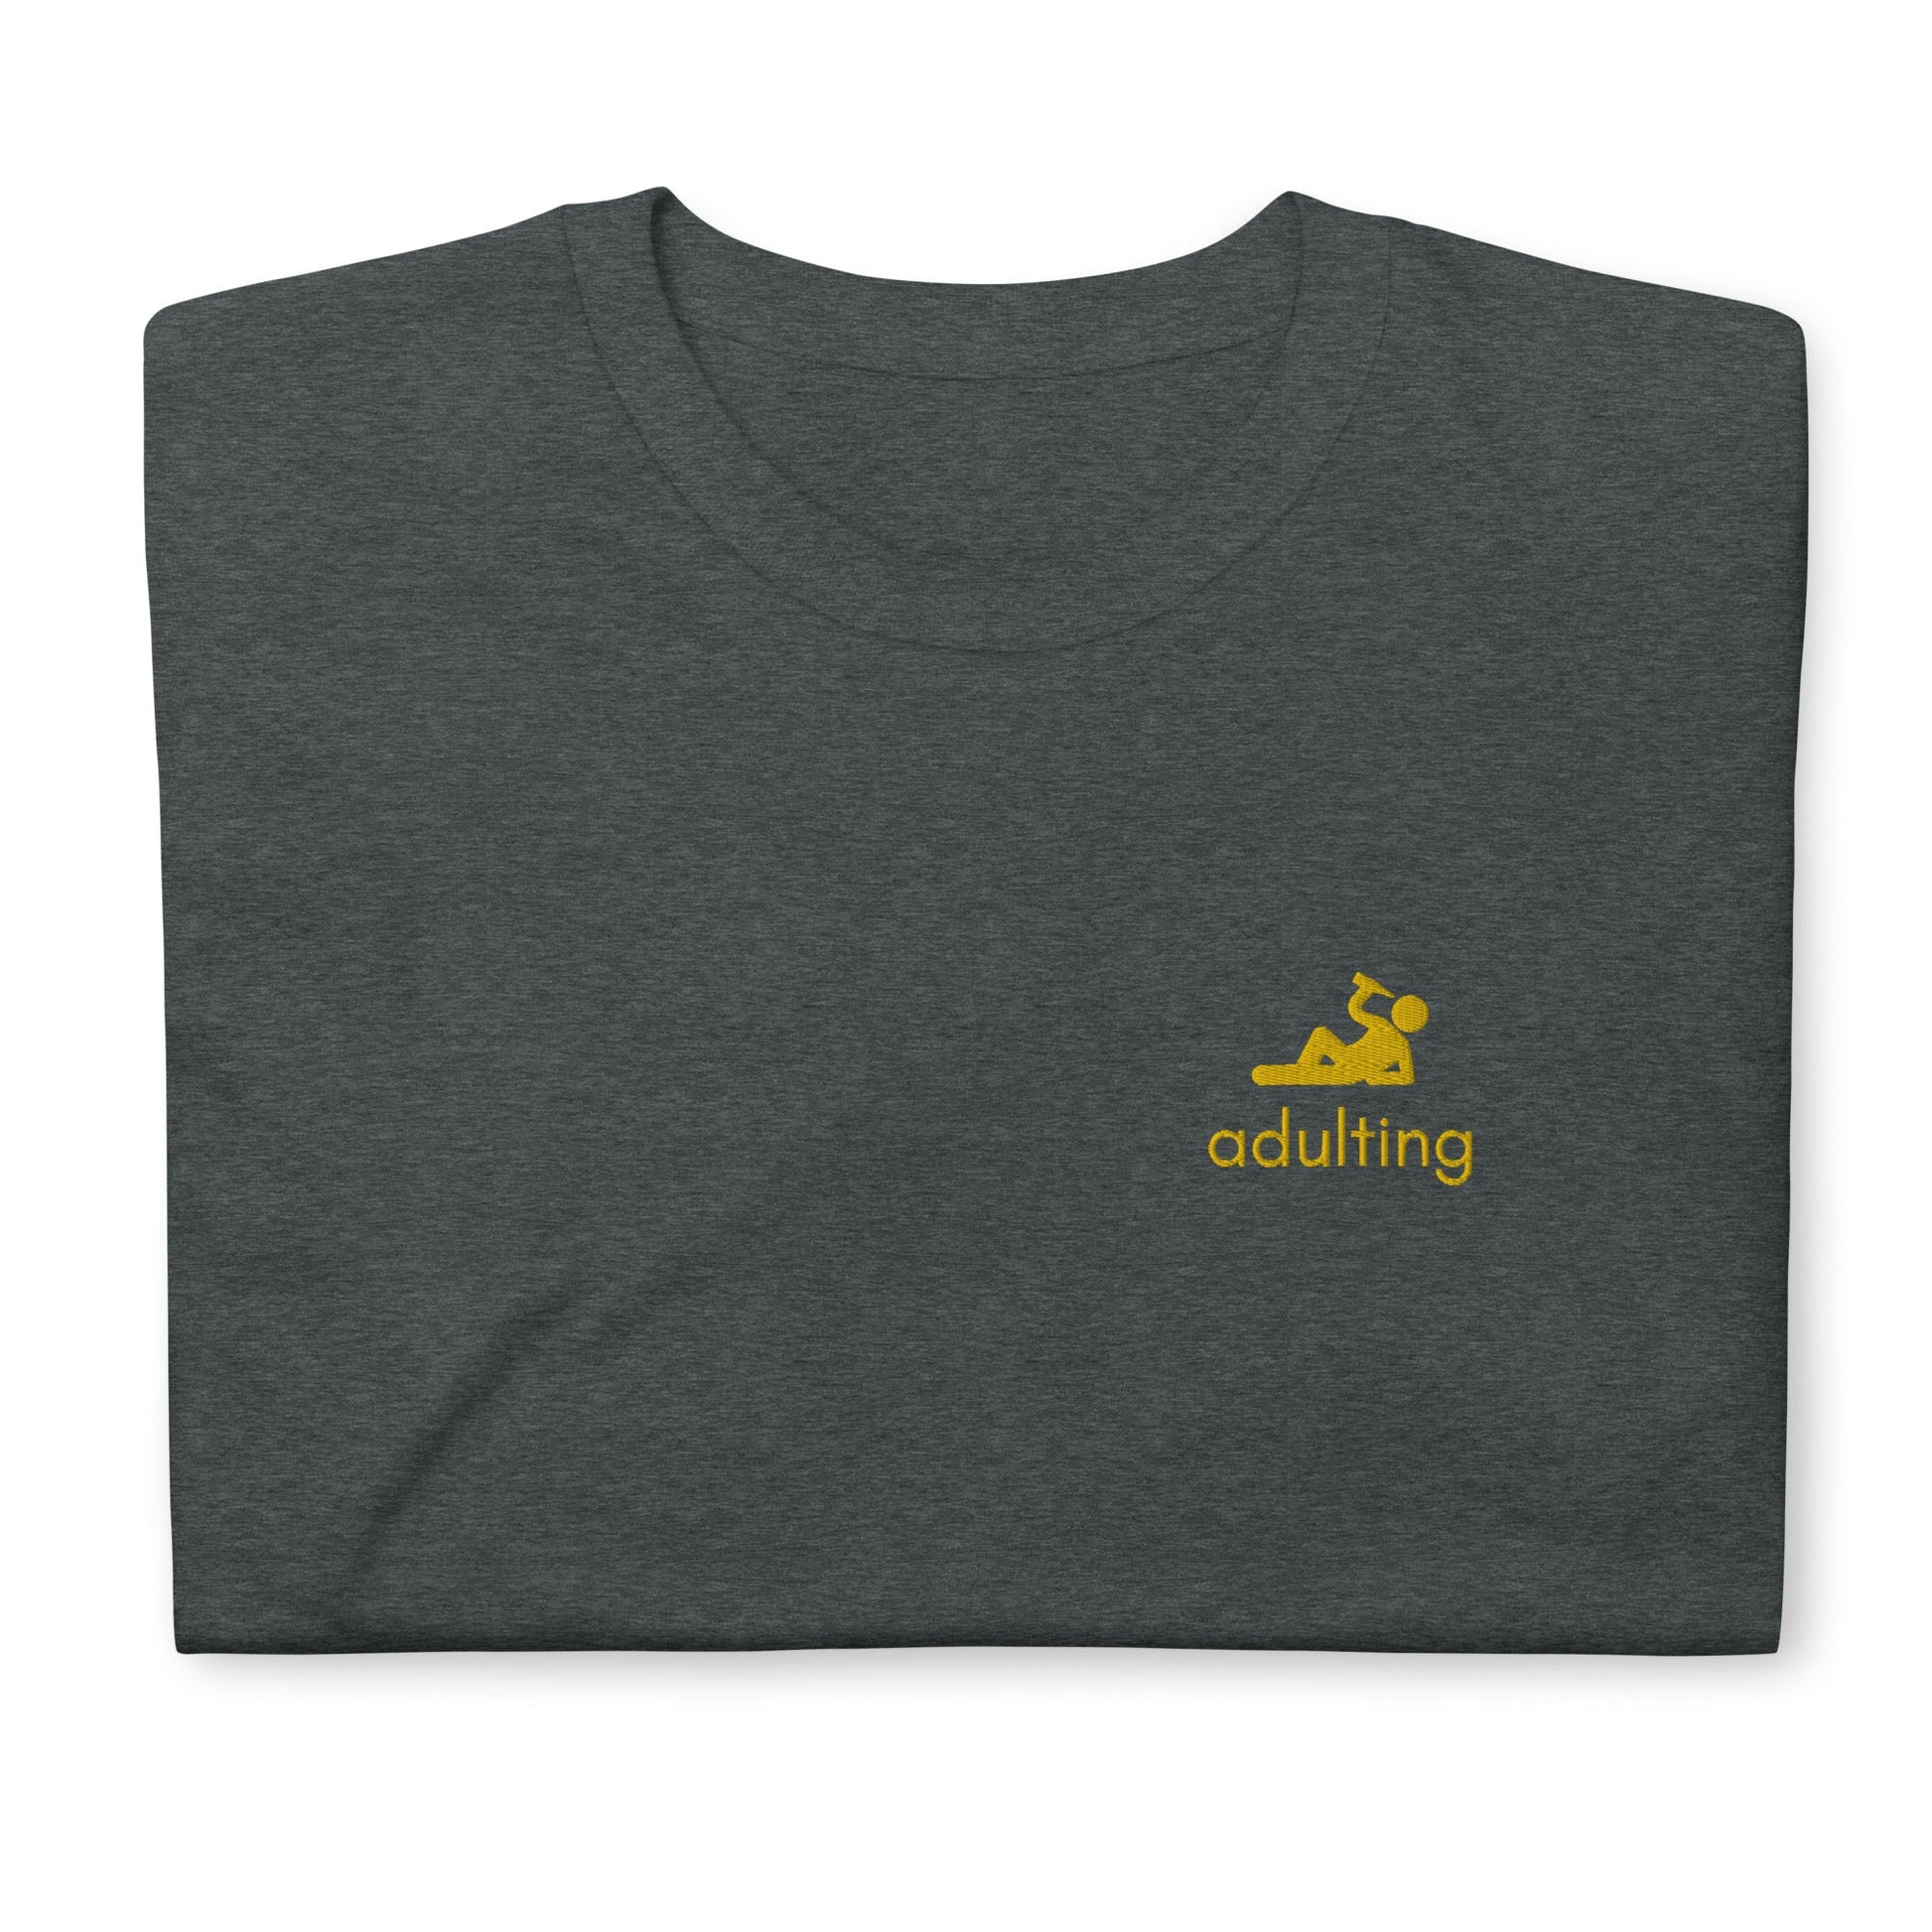 Adulting Embroidered Short-Sleeve Unisex T-Shirt - chucklecouture co.